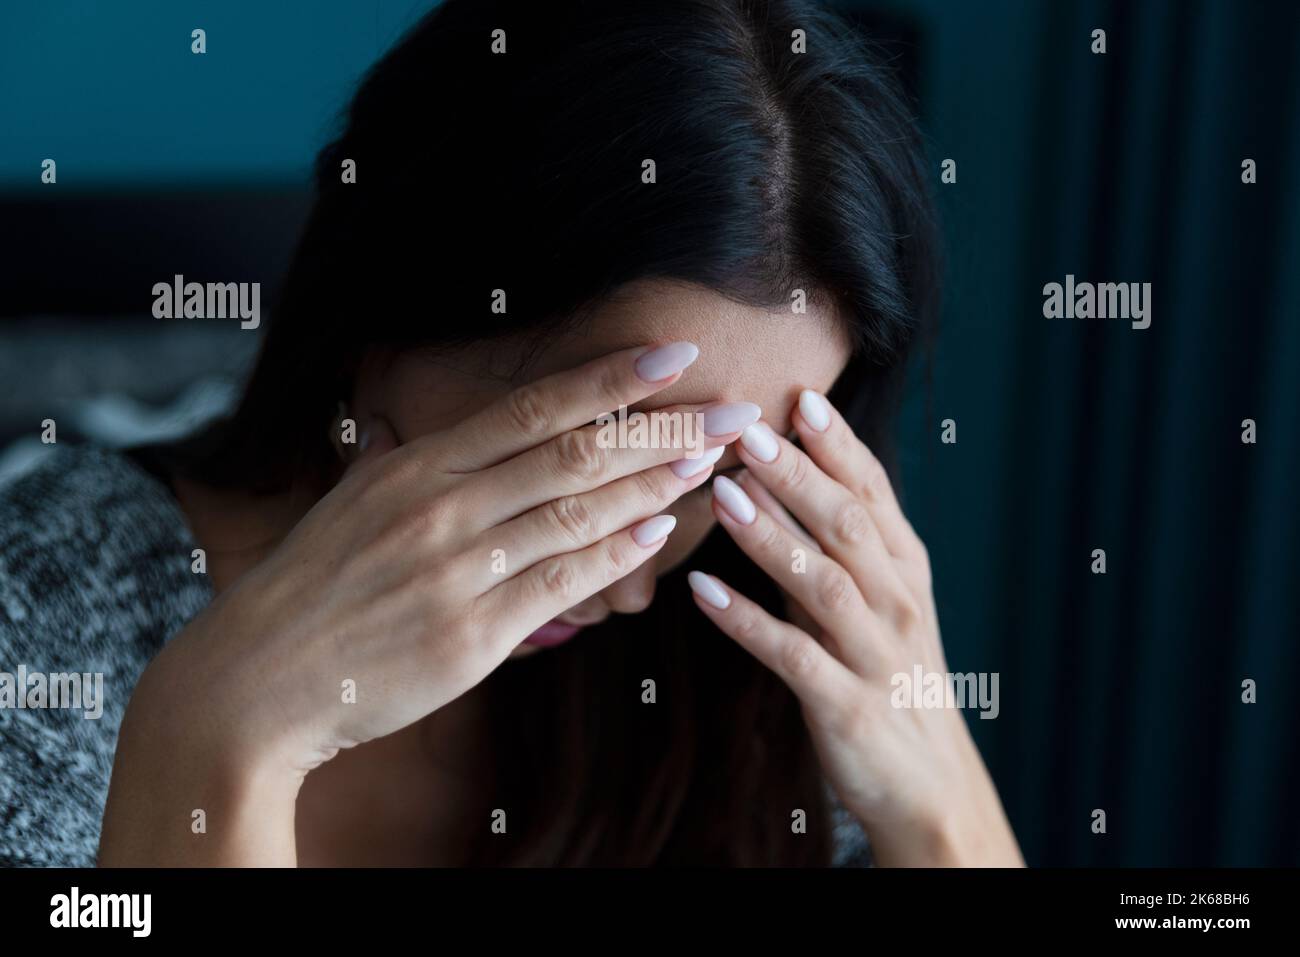 Woman suffering from depression. Sadness and headache concept Stock Photo